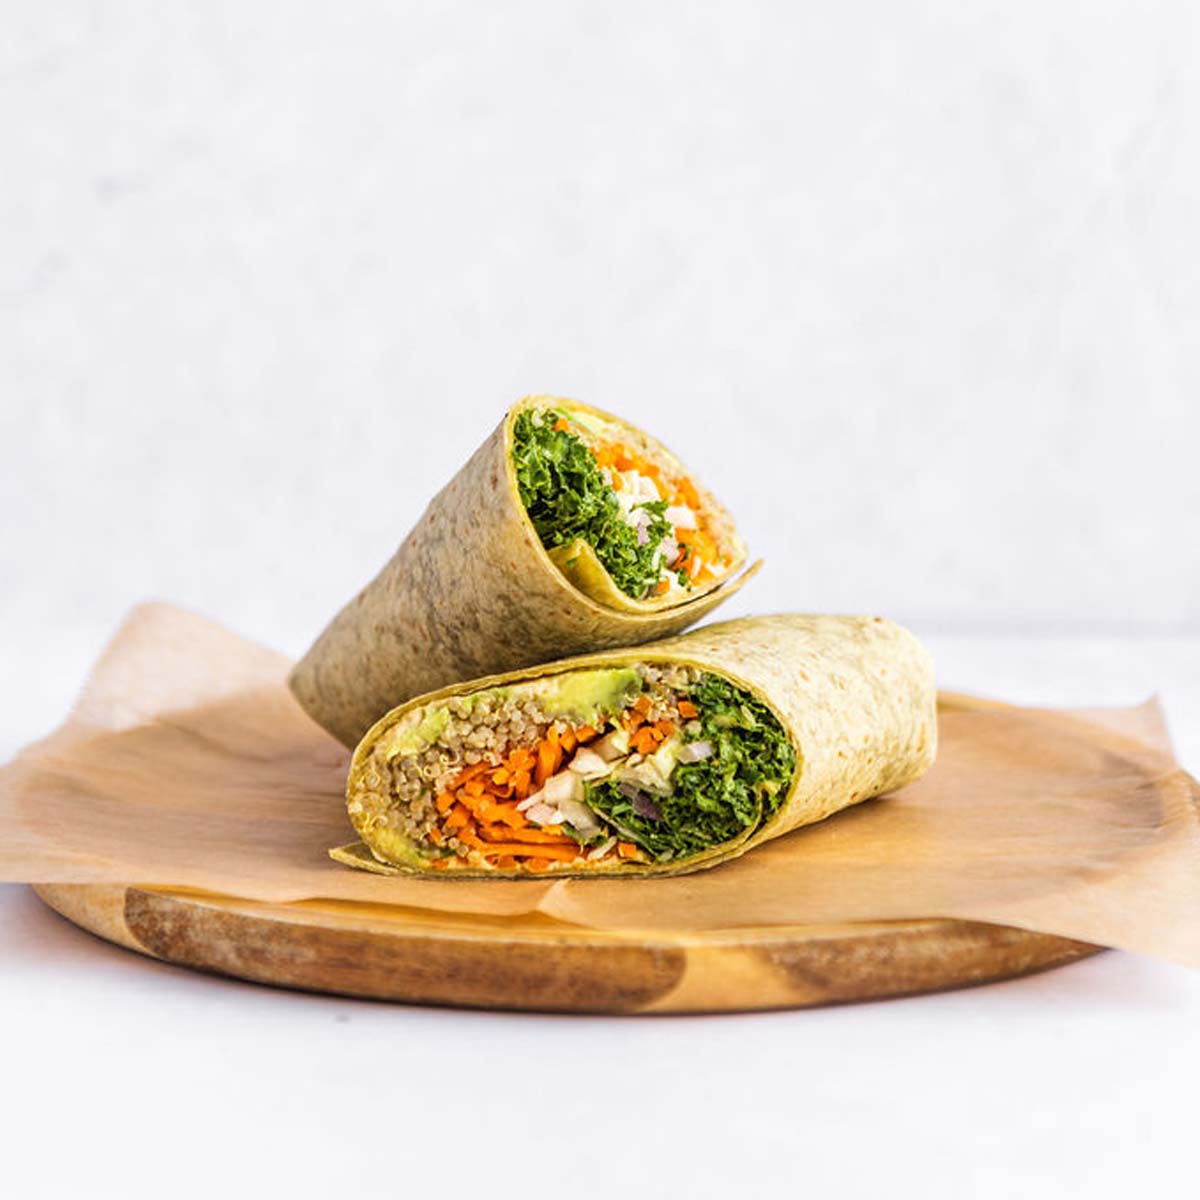 Vegan Wrap 🌯
Kale, quinoa, cabbage, carrots, pickled red onions, avocado, and hummus, wrapped in a spinach tortilla and served with tahini. 

#VeganWrap #Vegan #VeganOptions #PlantBased #KaleMeCrazy #HomewoodAL